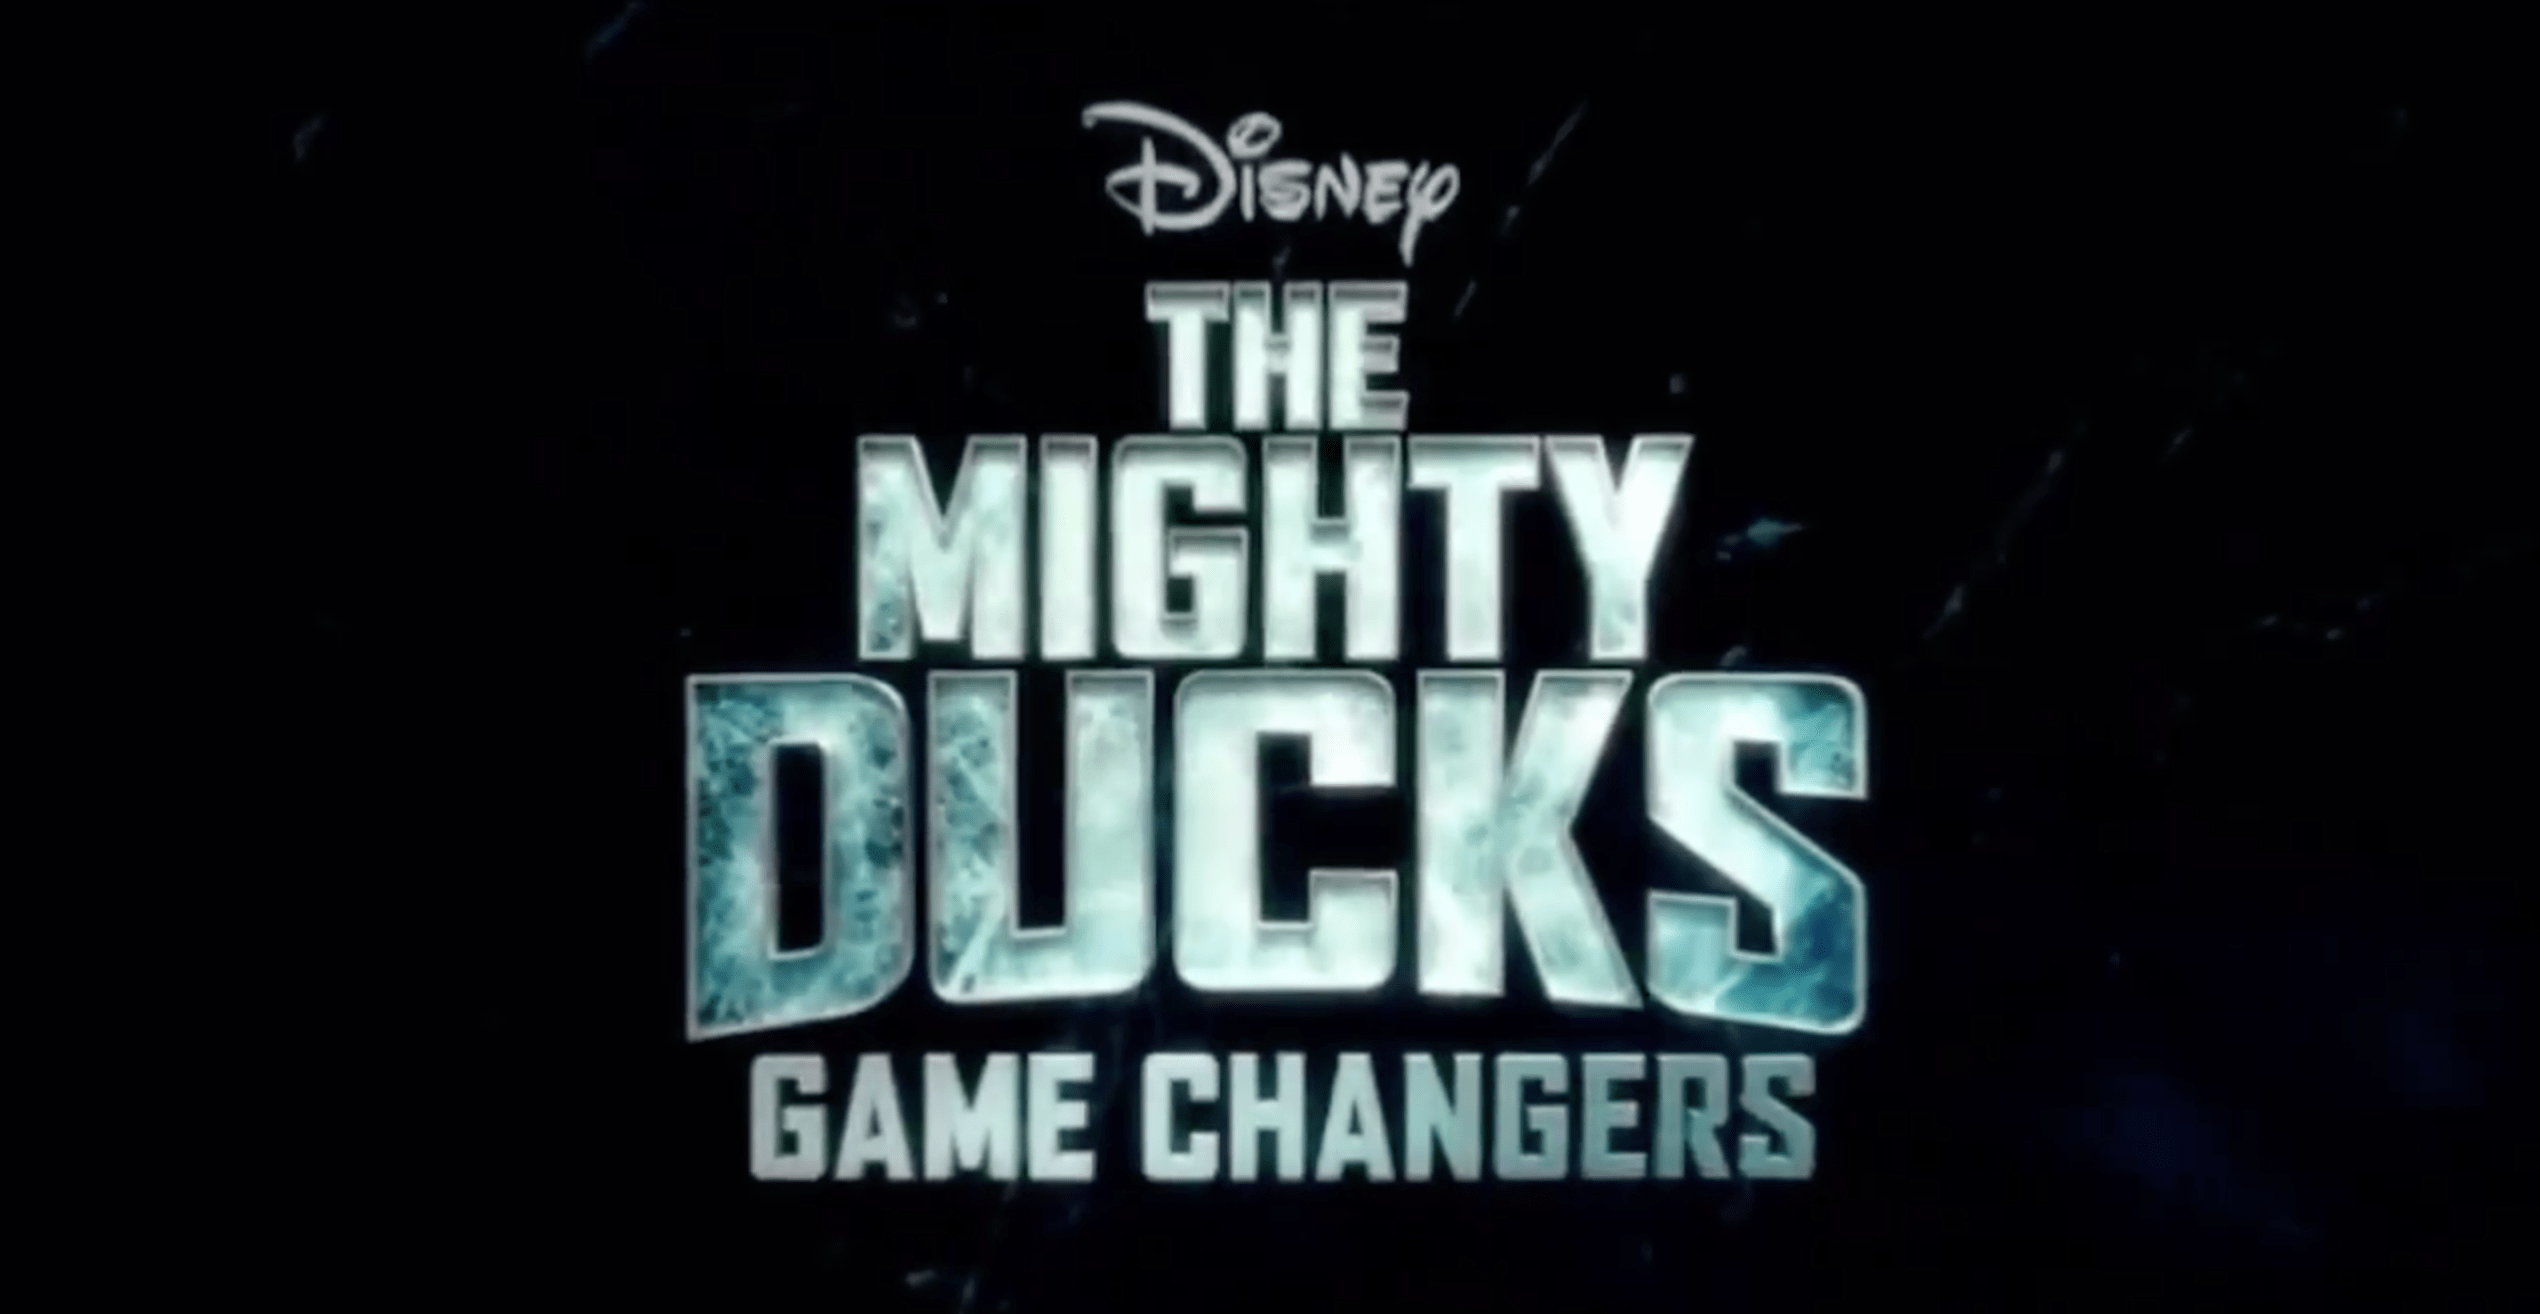  The Mighty Ducks: Game Changers: New Details and Reaction